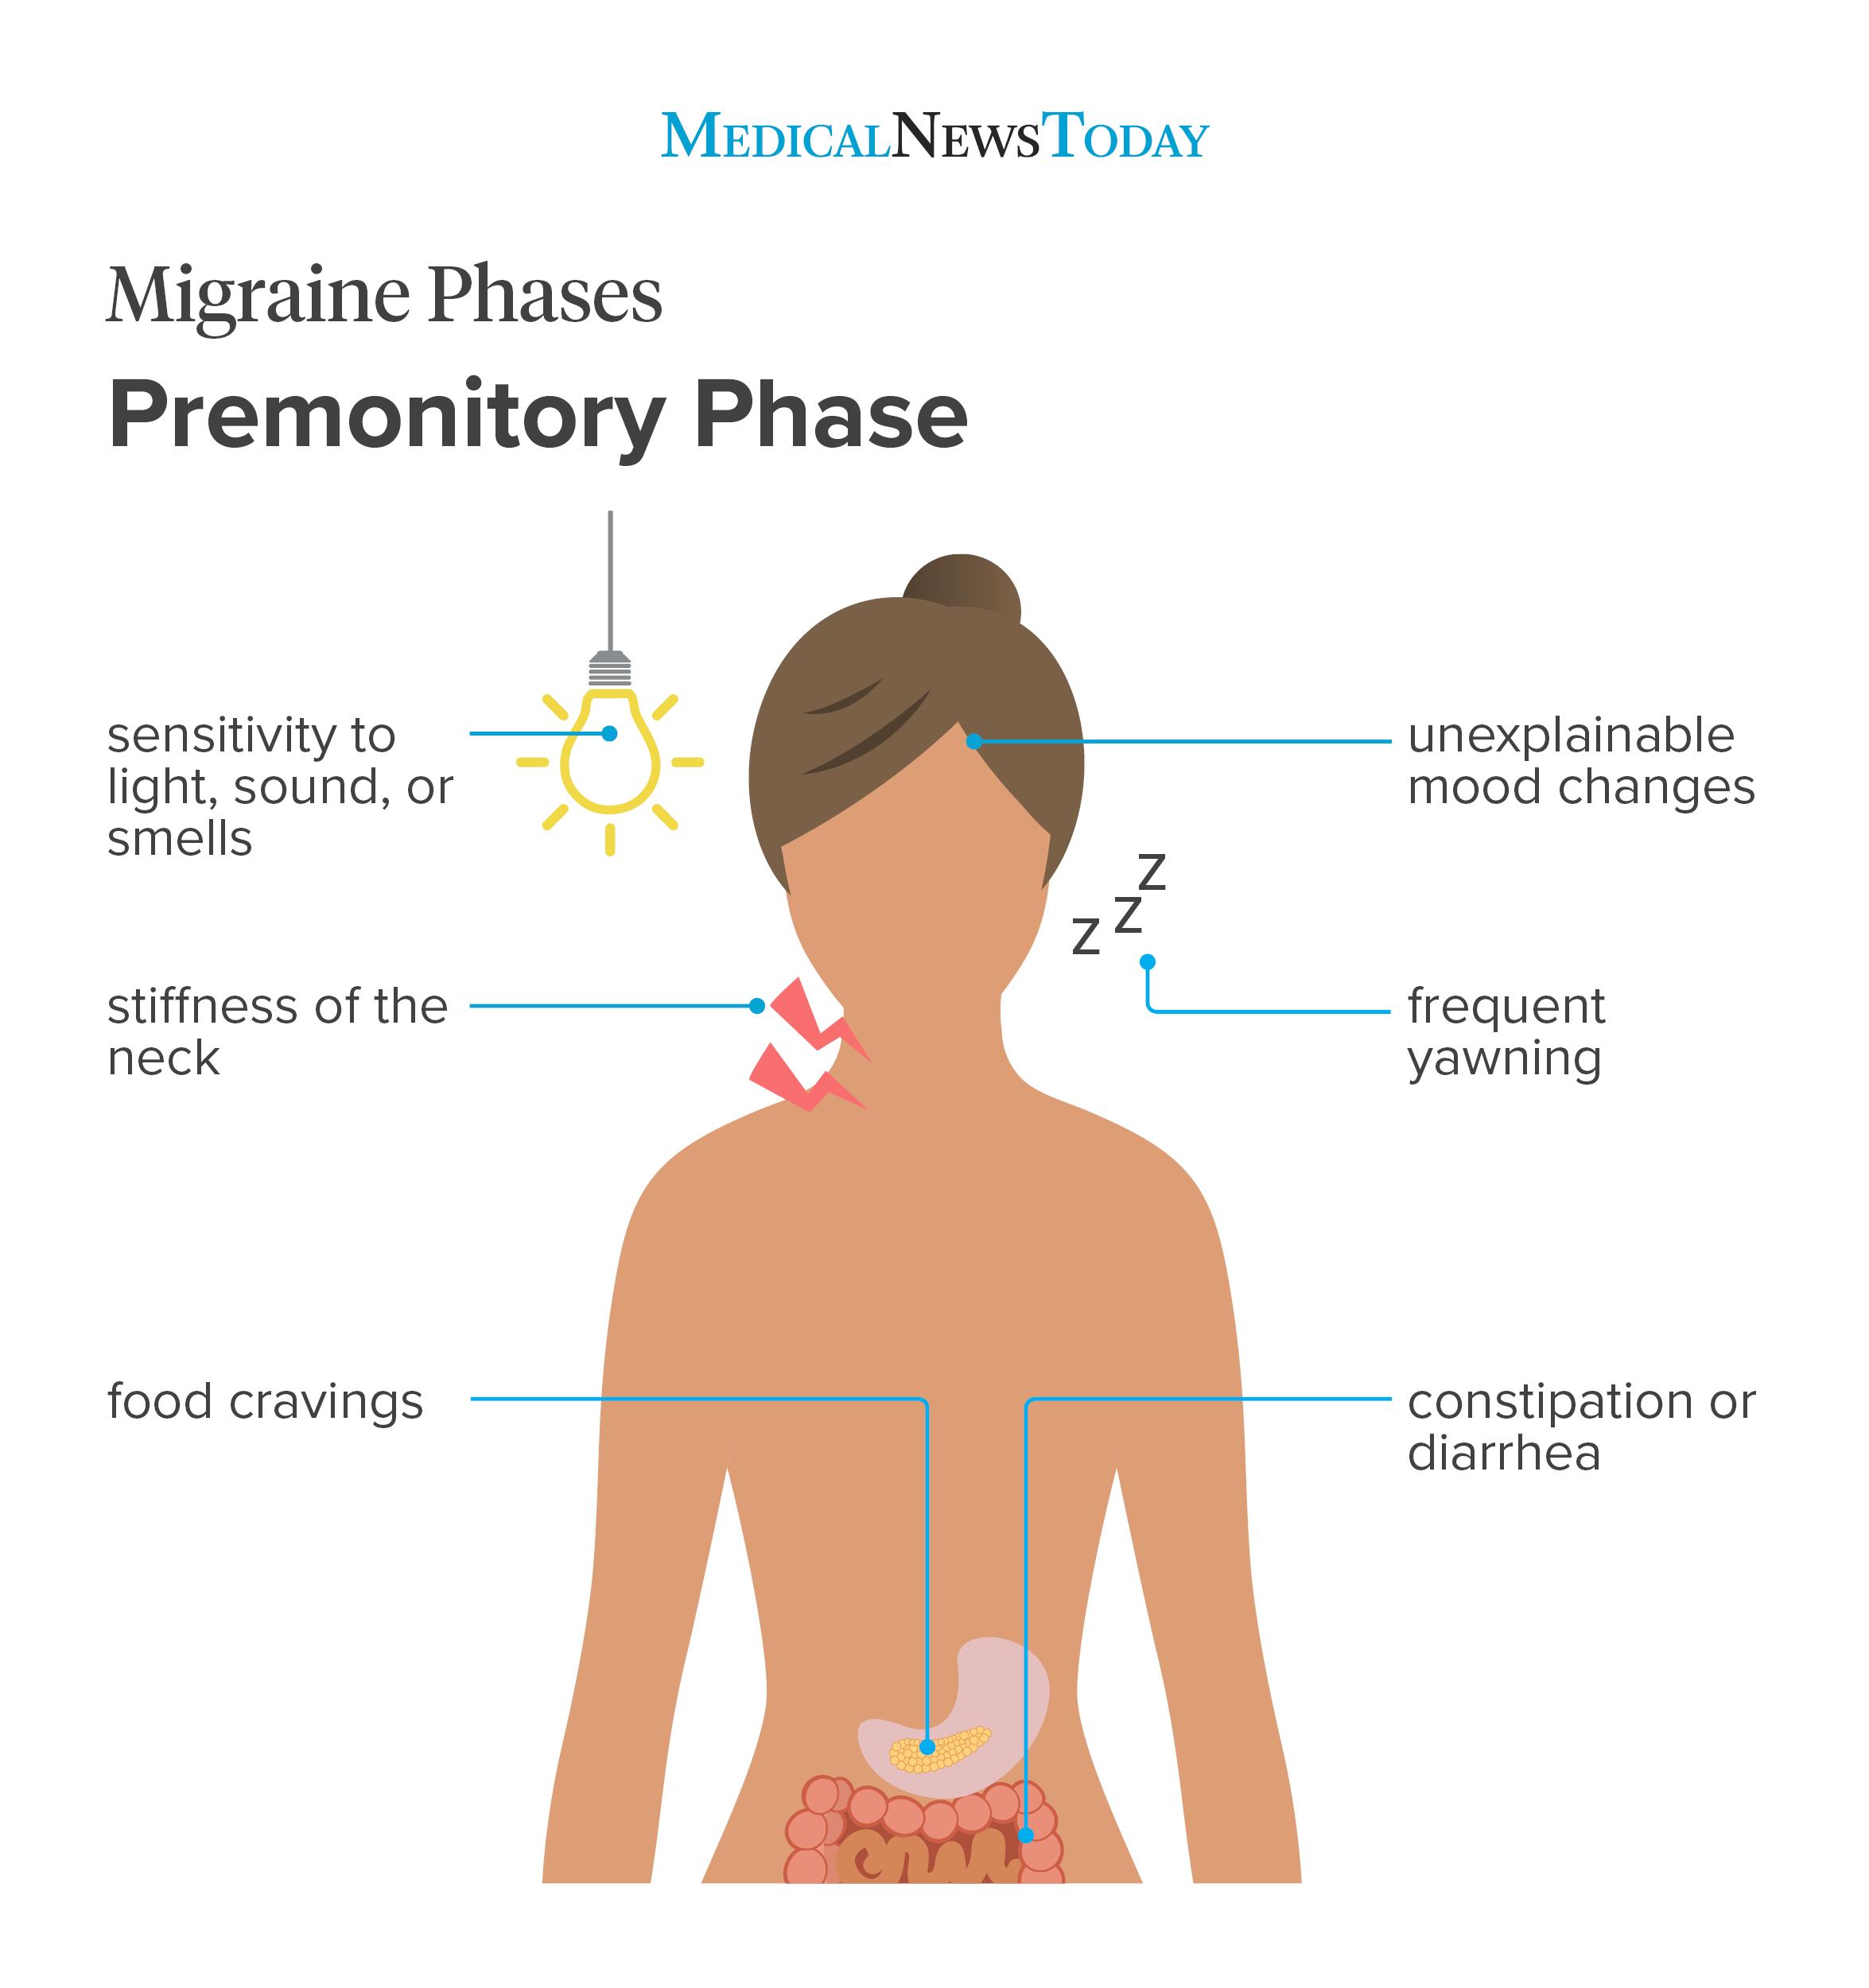 Migraine phases infographic - Premonitory phase <br>Image credit: Stephen kelly, 2019</br>